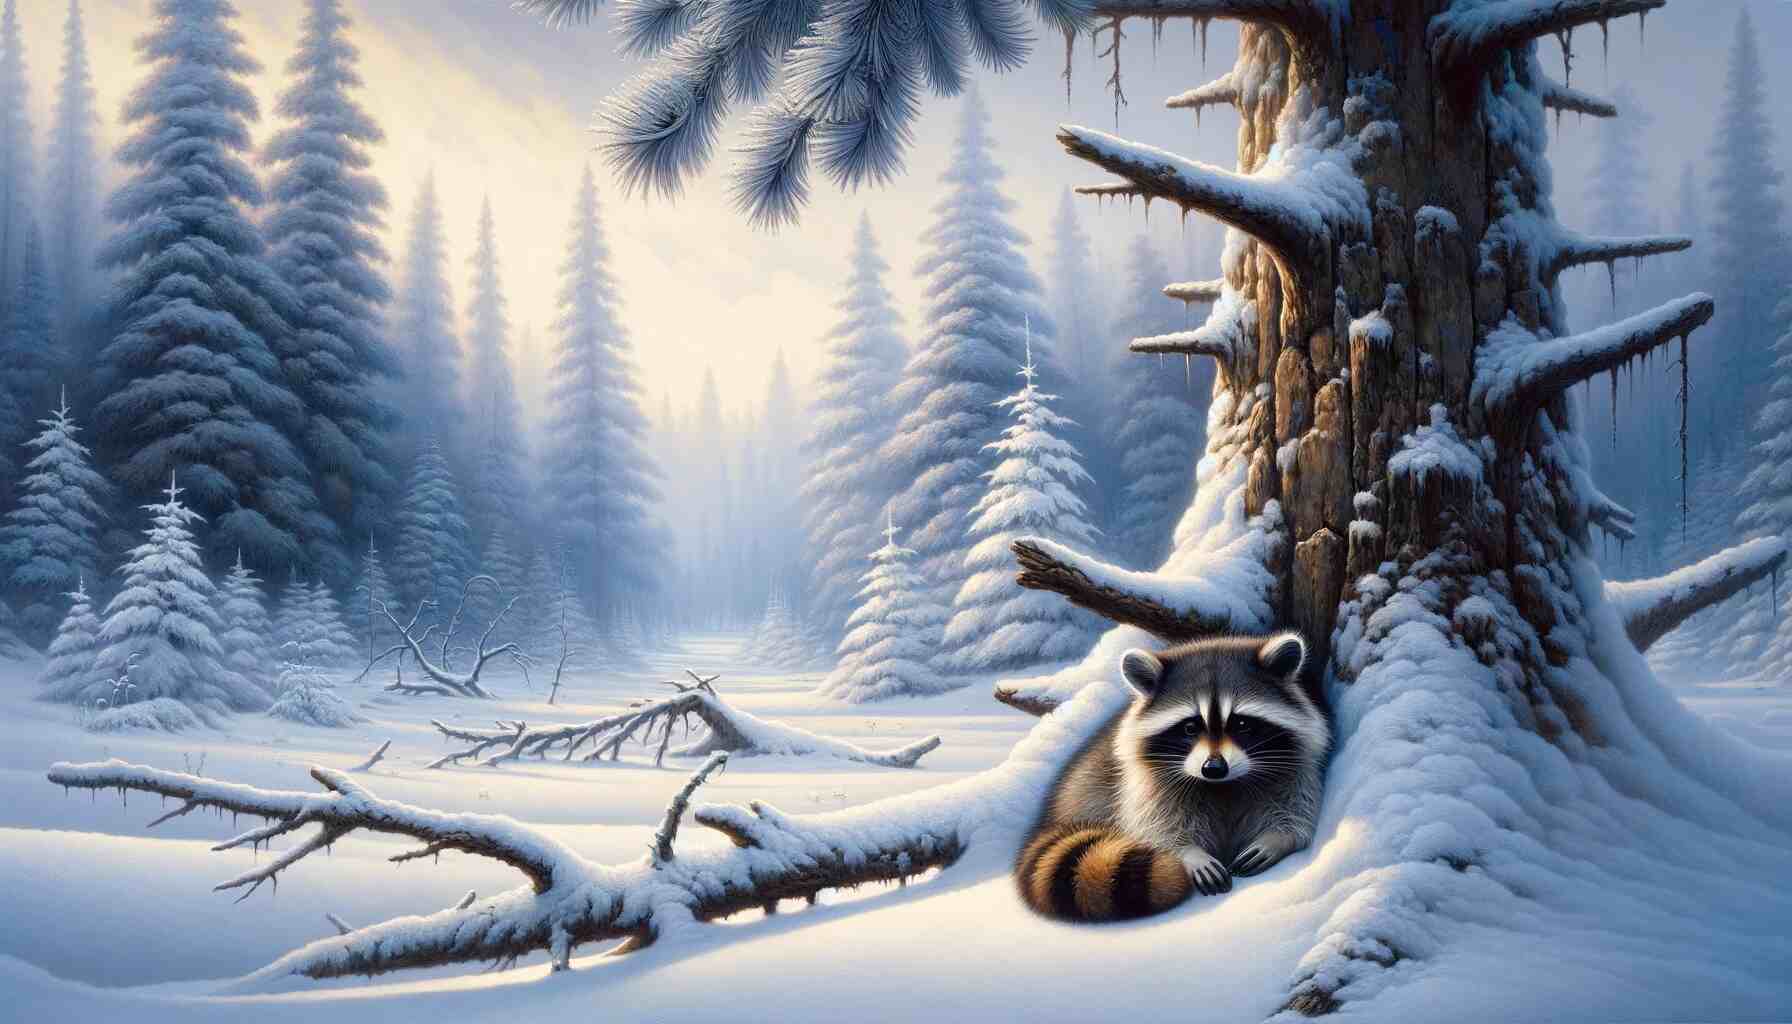 Here is the featured image for “Can Raccoons Freeze to Death in the Winter,” depicting a raccoon in a snowy forest, showcasing its struggle to survive in harsh winter conditions.